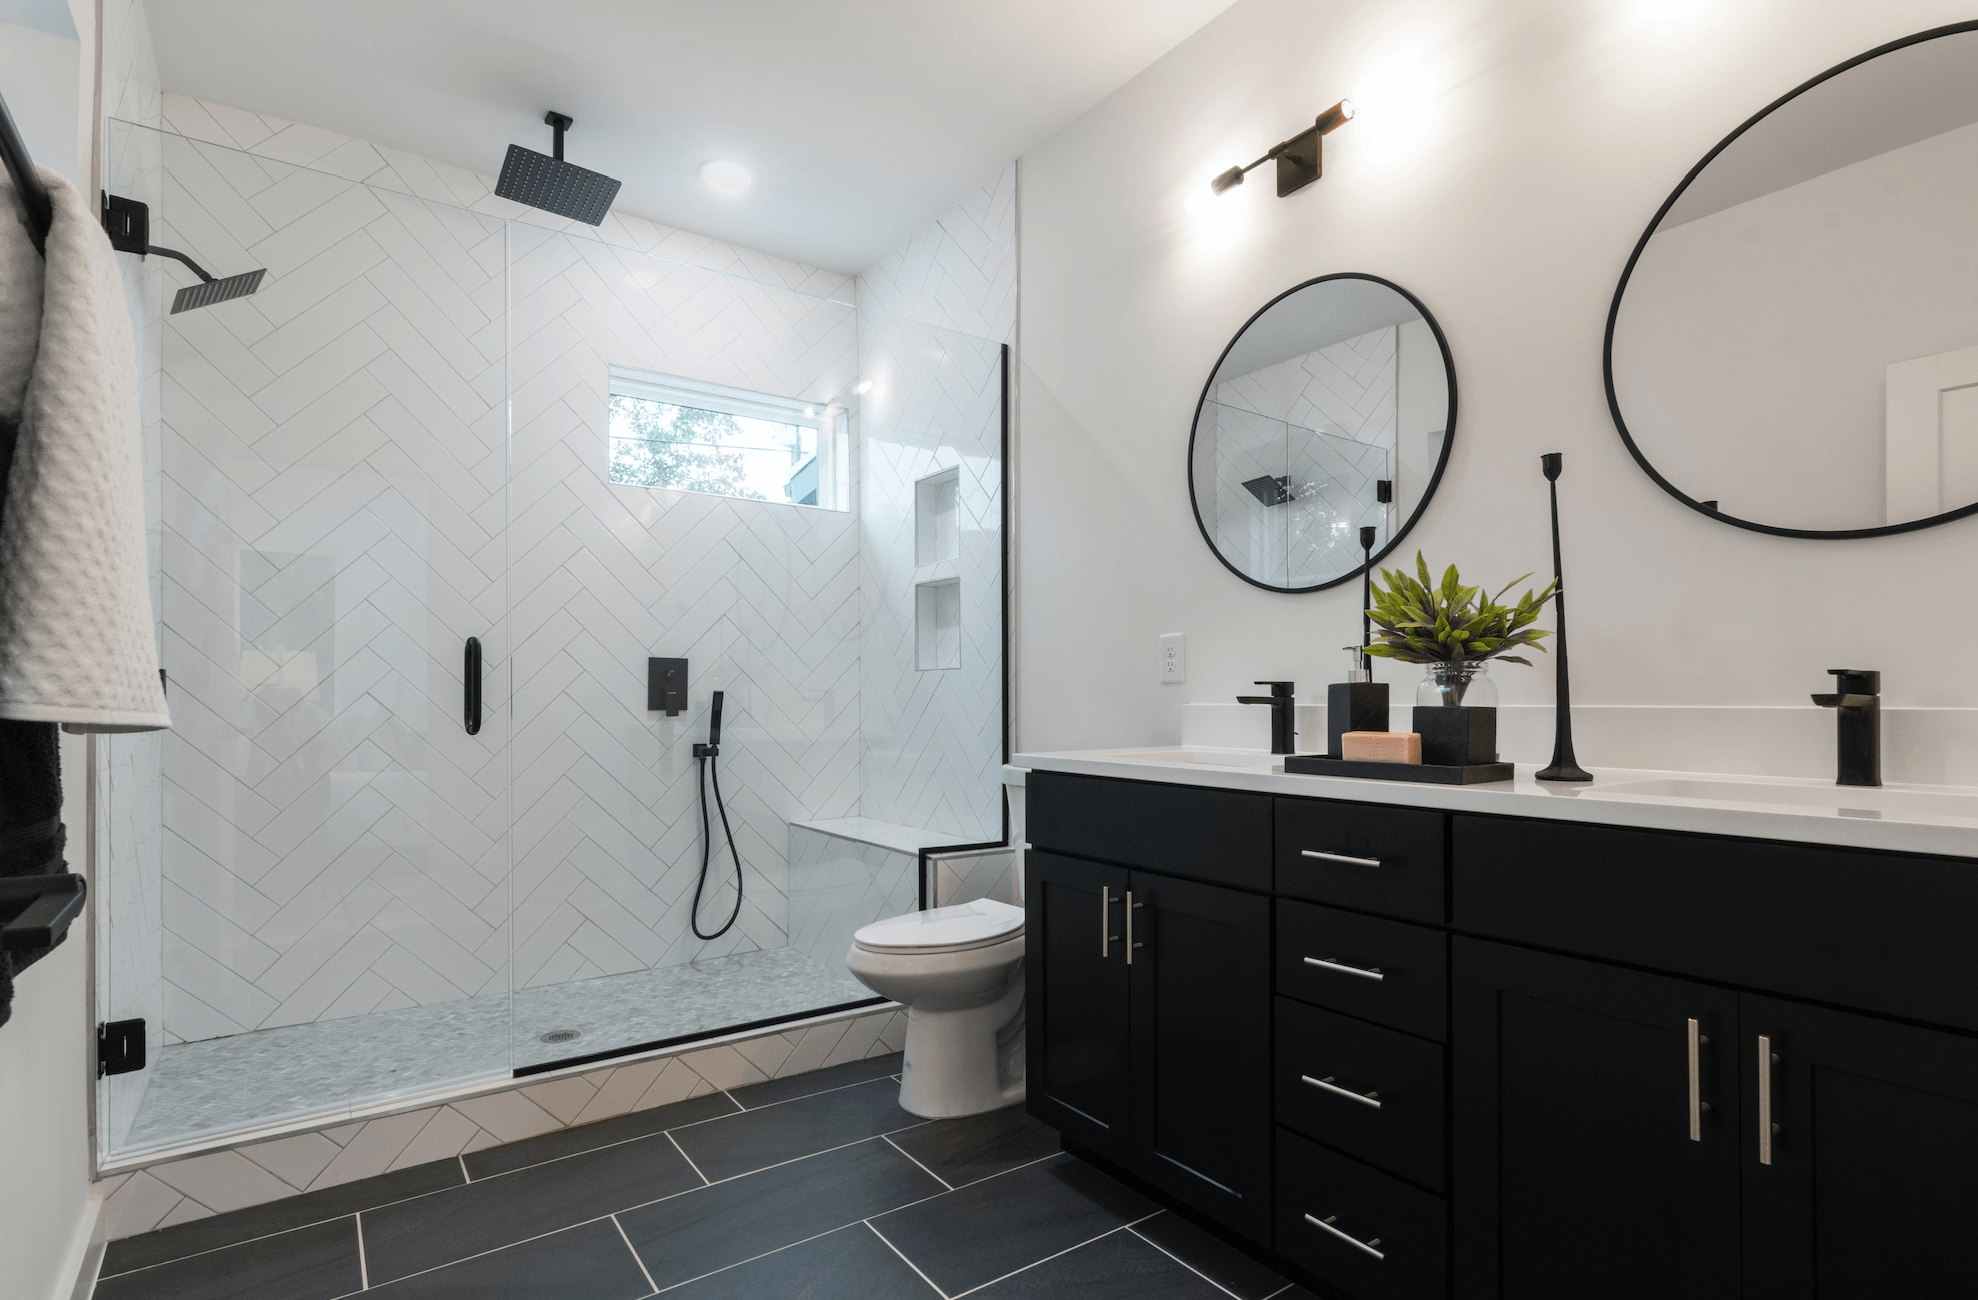 The Advantages Of Installing A Luxury Shower - Bathroom Design Center